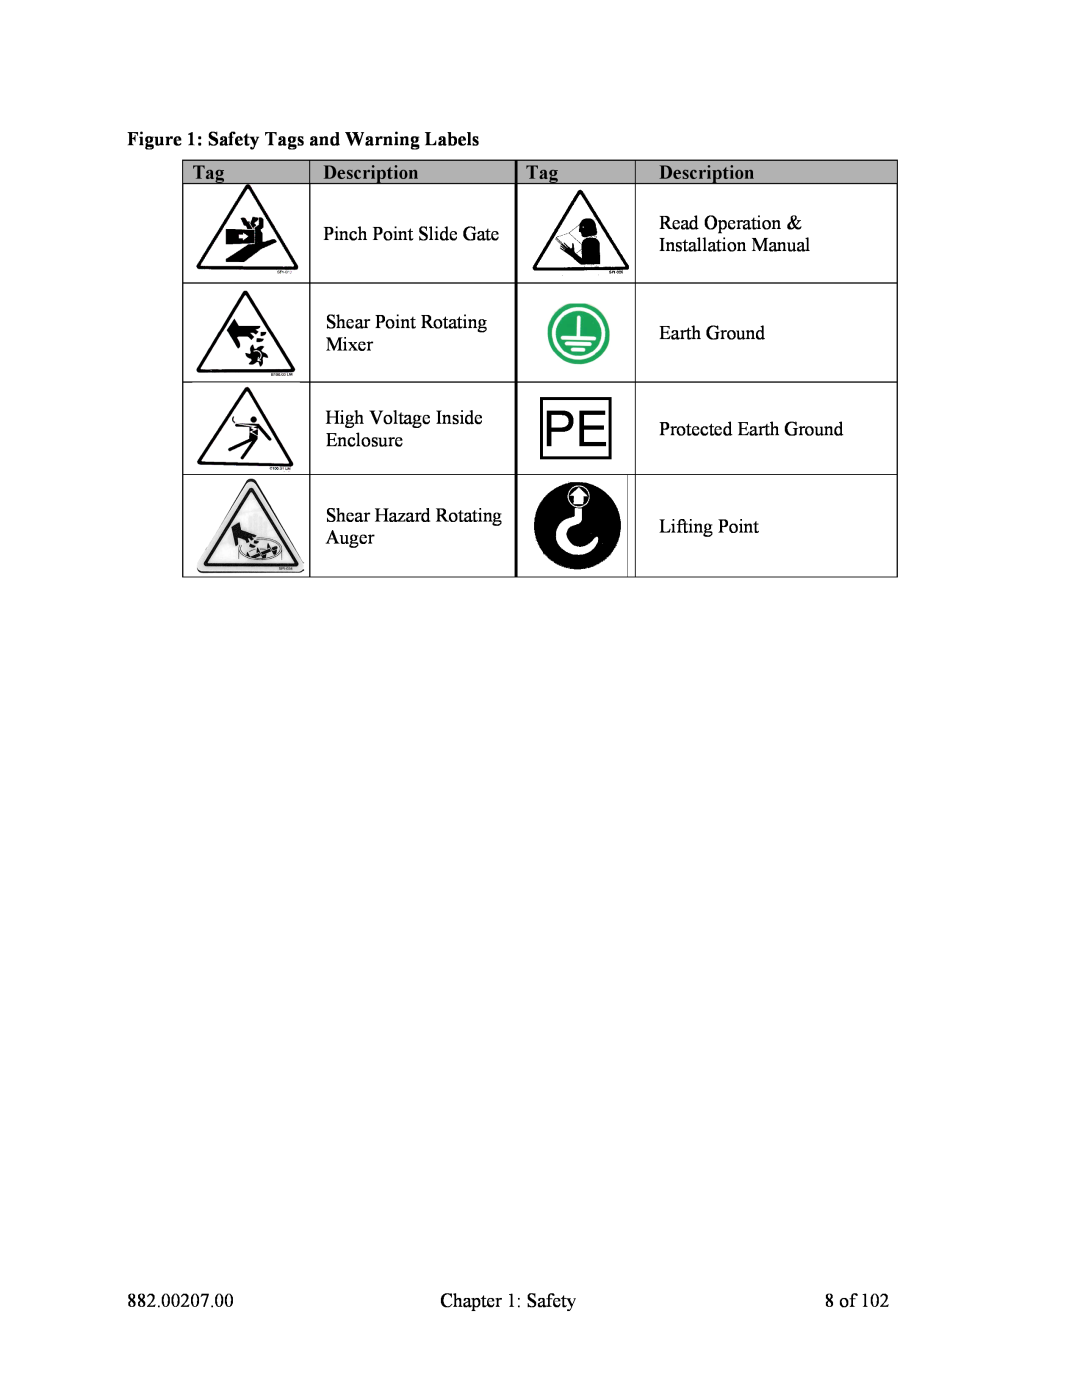 Mitsubishi Electronics 882.00207.00 specifications Safety Tags and Warning Labels, Description 